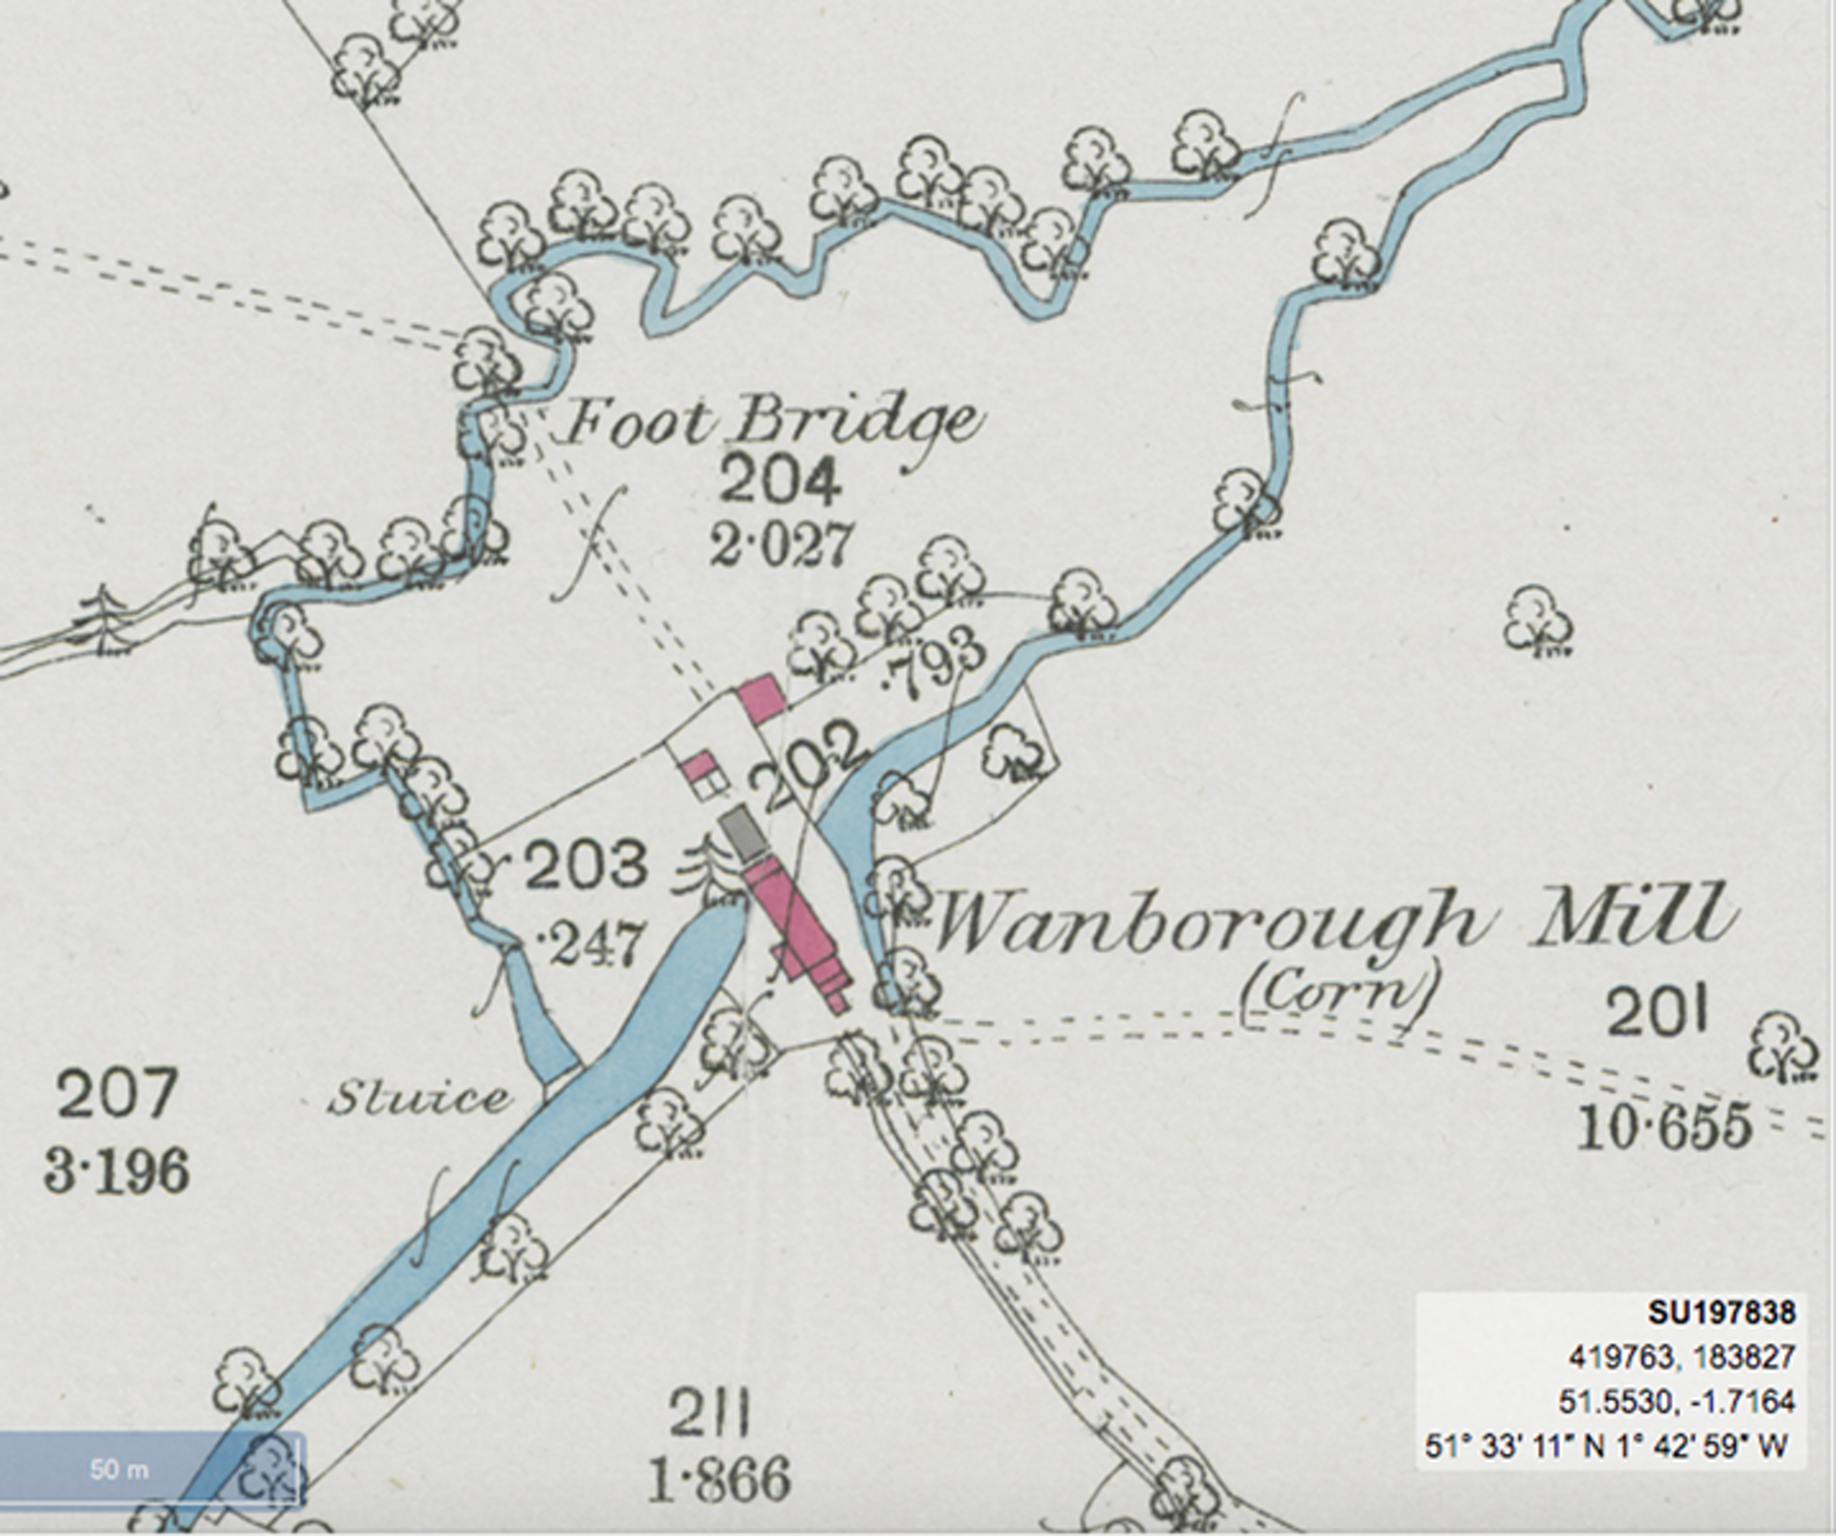 Location of the mill. Photo courtesy of National Library of Scotland.